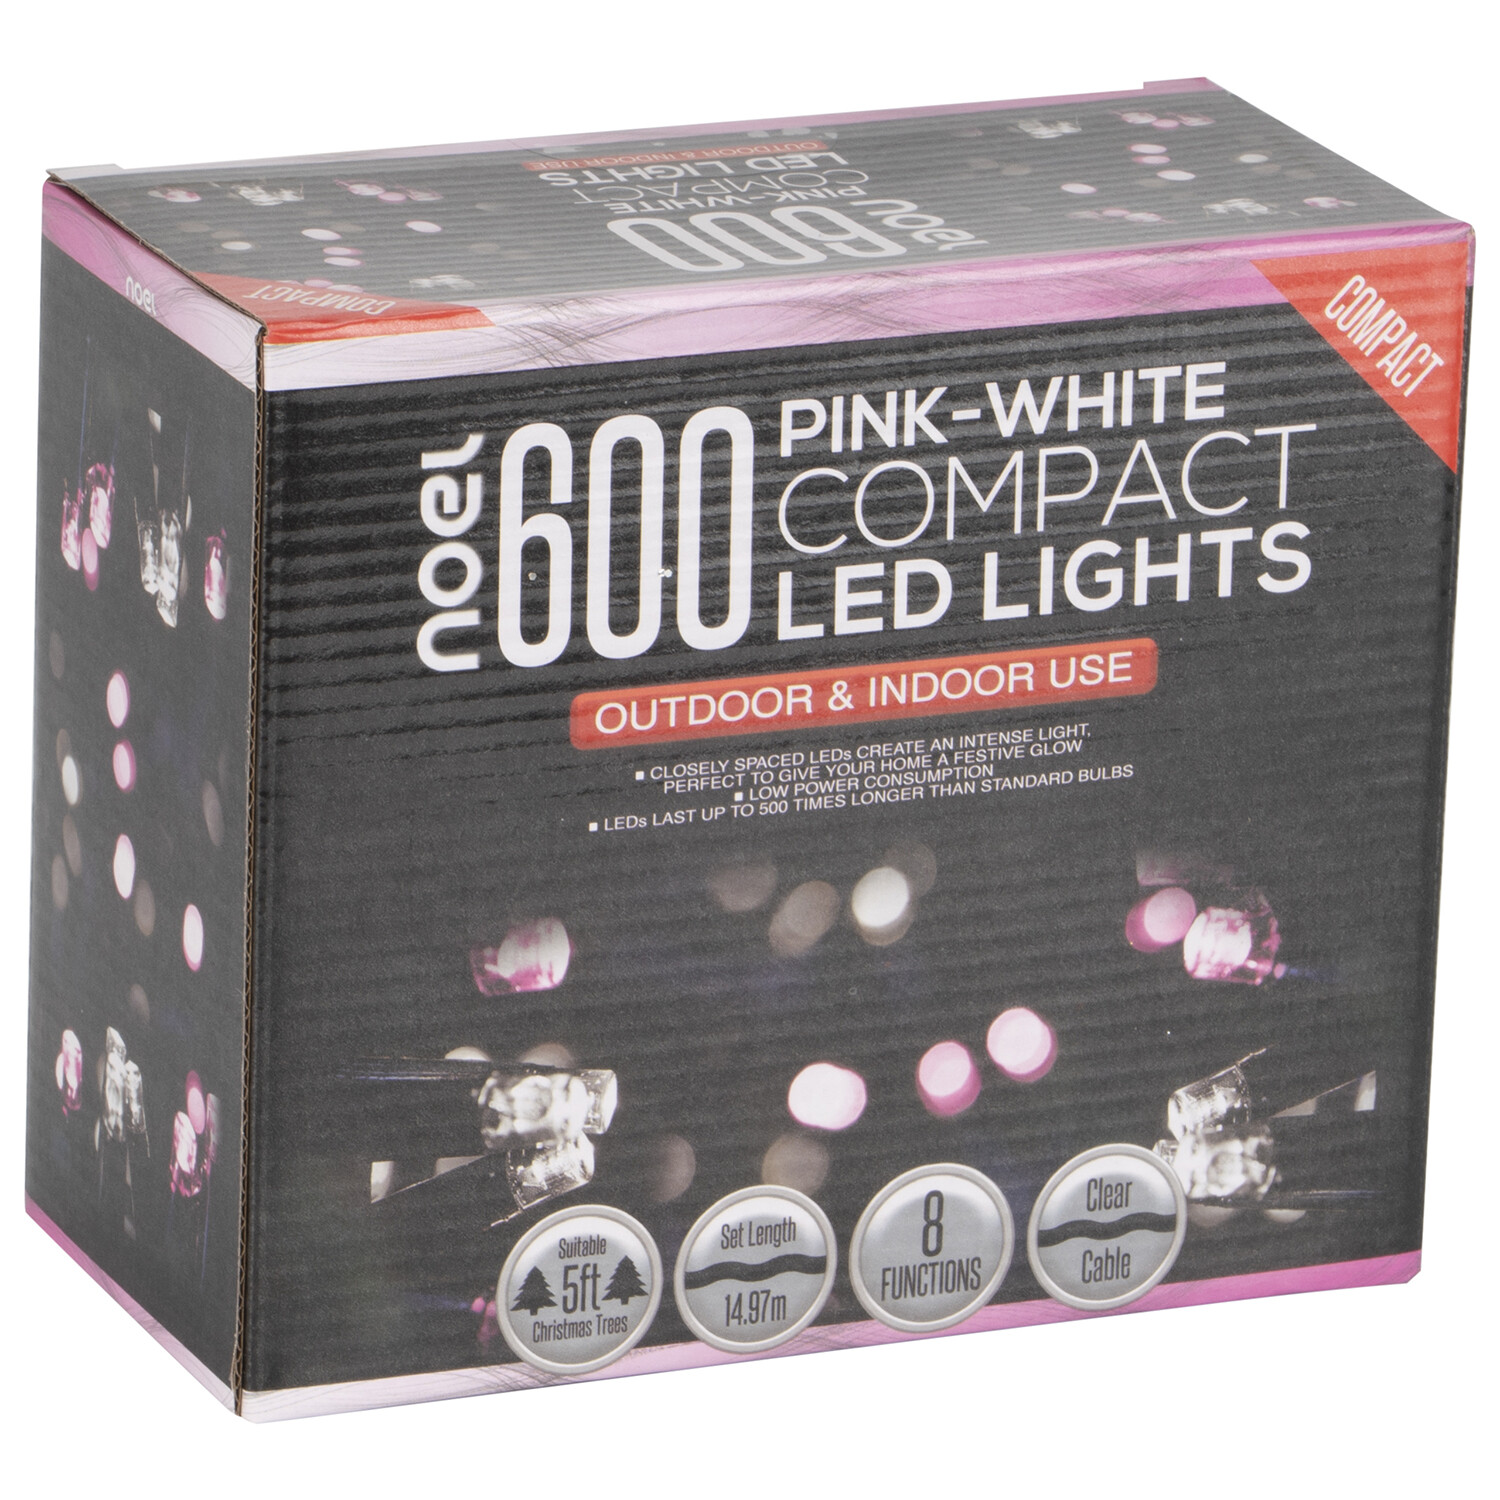 Compact LED Lights - Pink-White / 600 Image